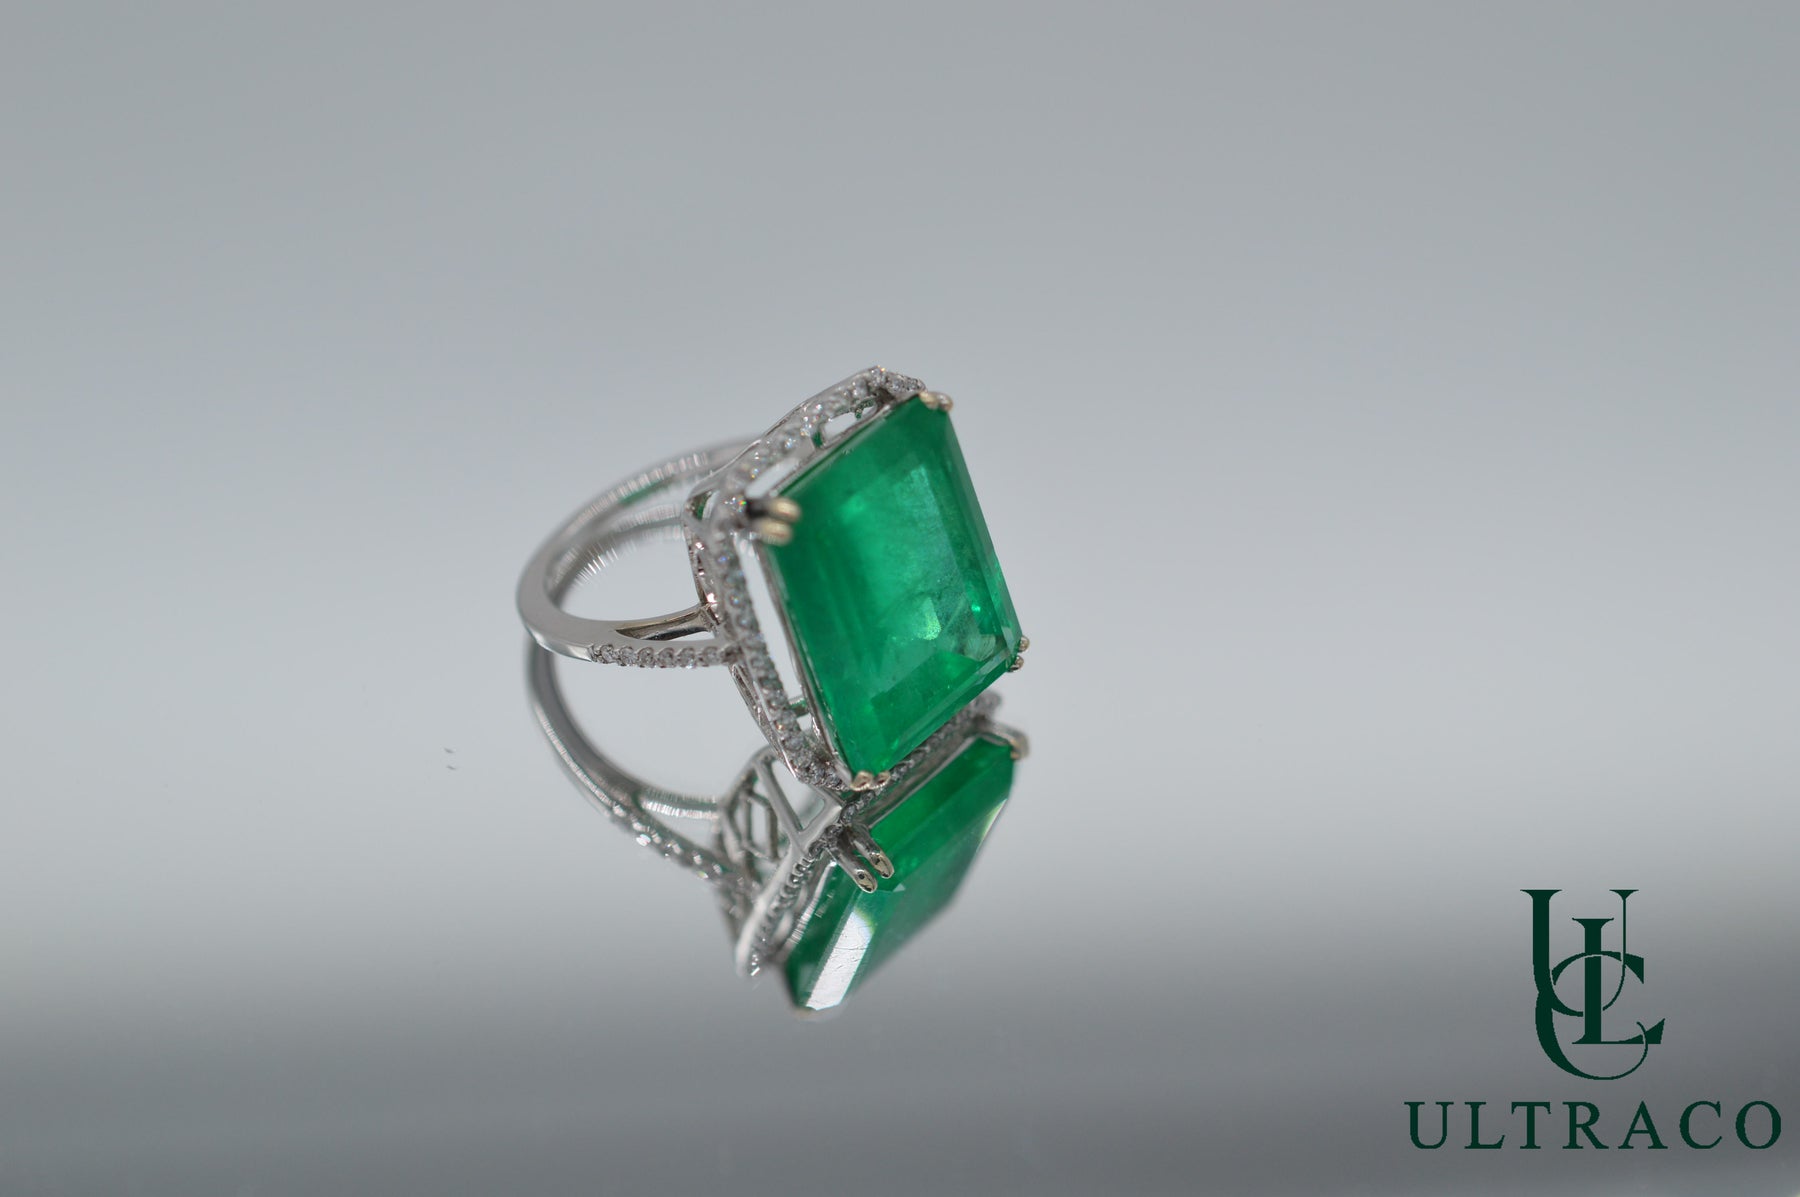 Colombian Emerald With Diamond Set In 18K White Gold